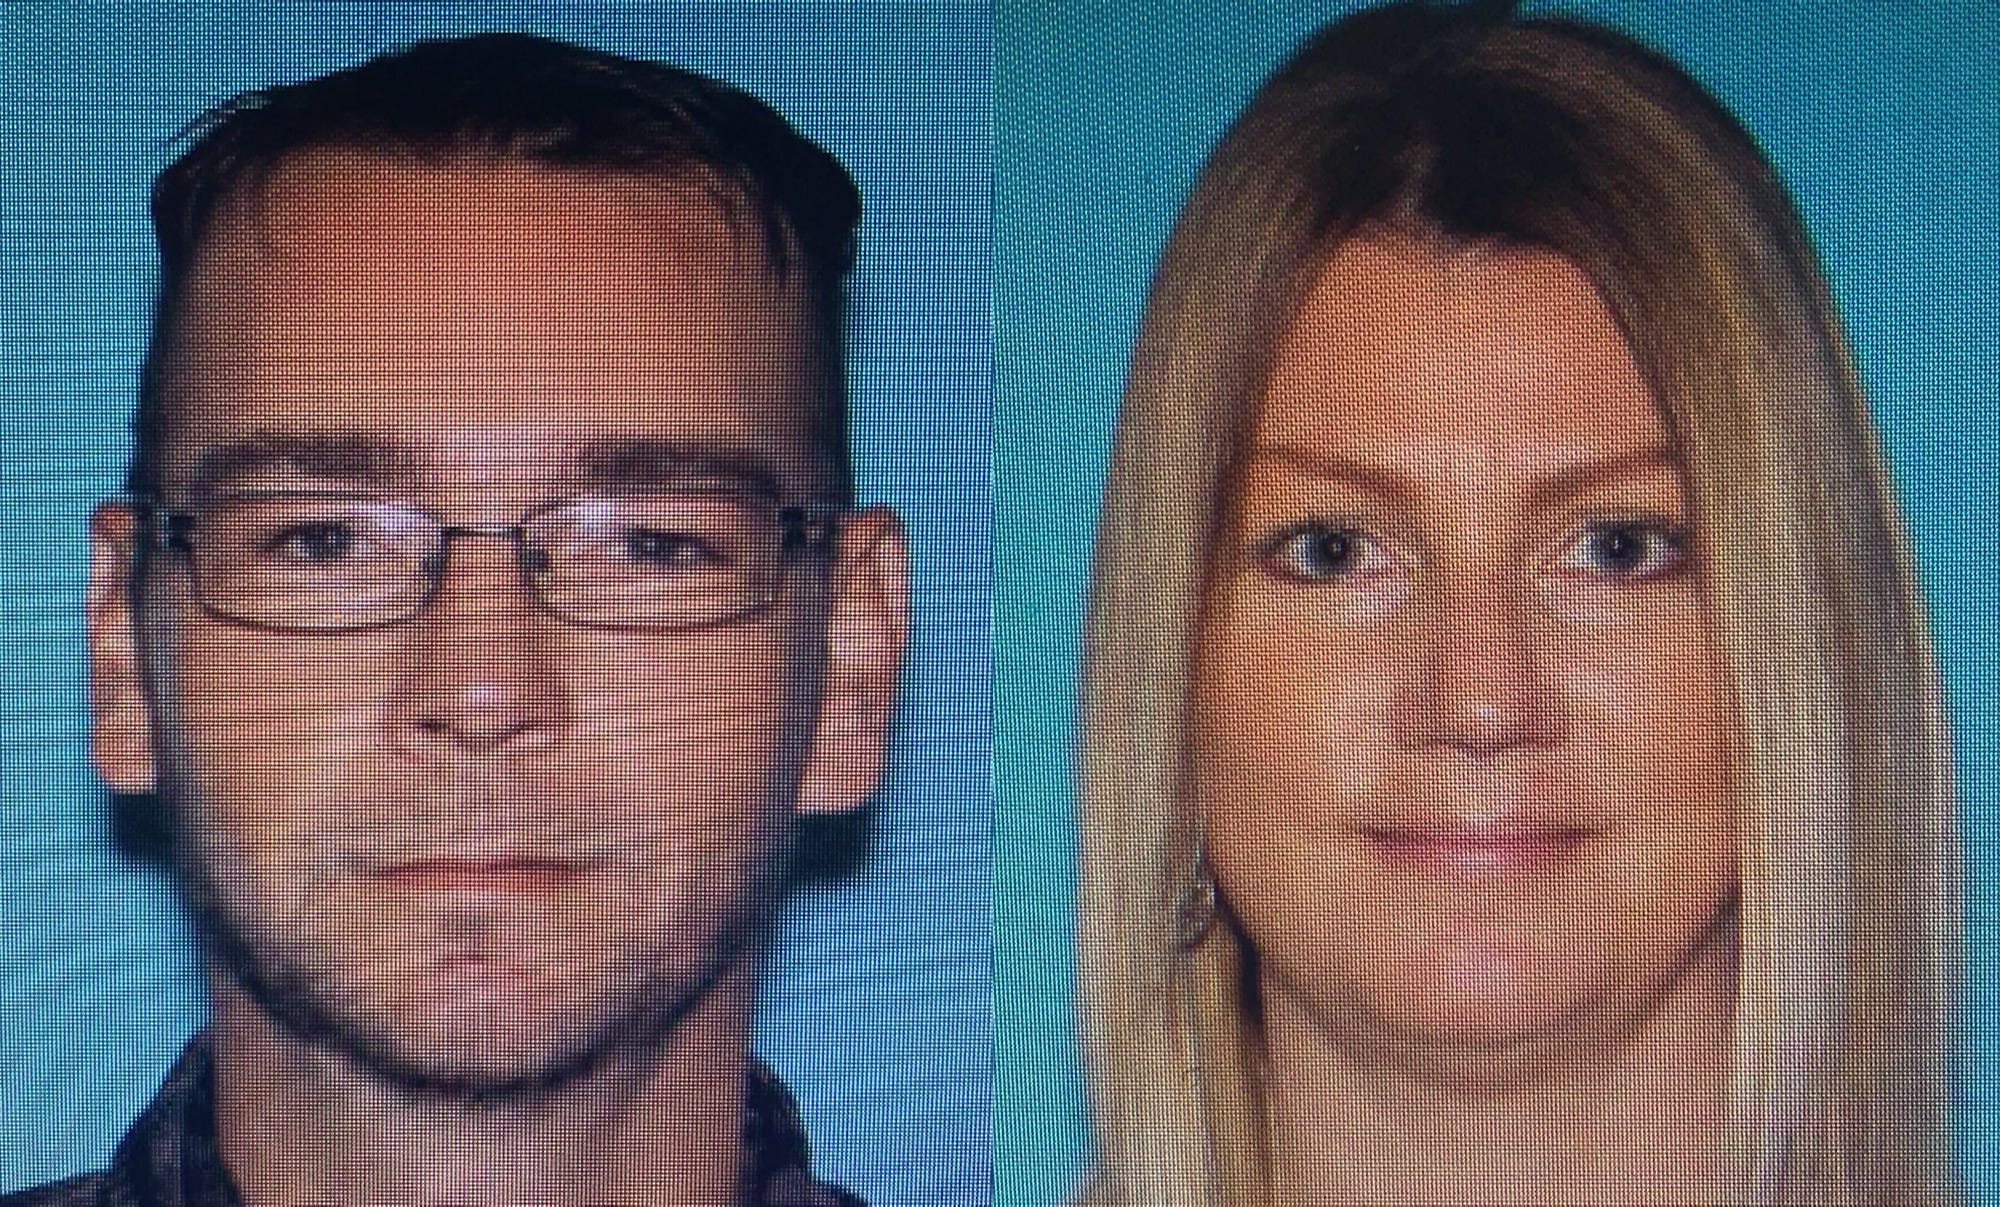 Jennifer and James Crumbley, the parents of Ethan Crumbley, face involuntary manslaughter charges for their connection to the gun.